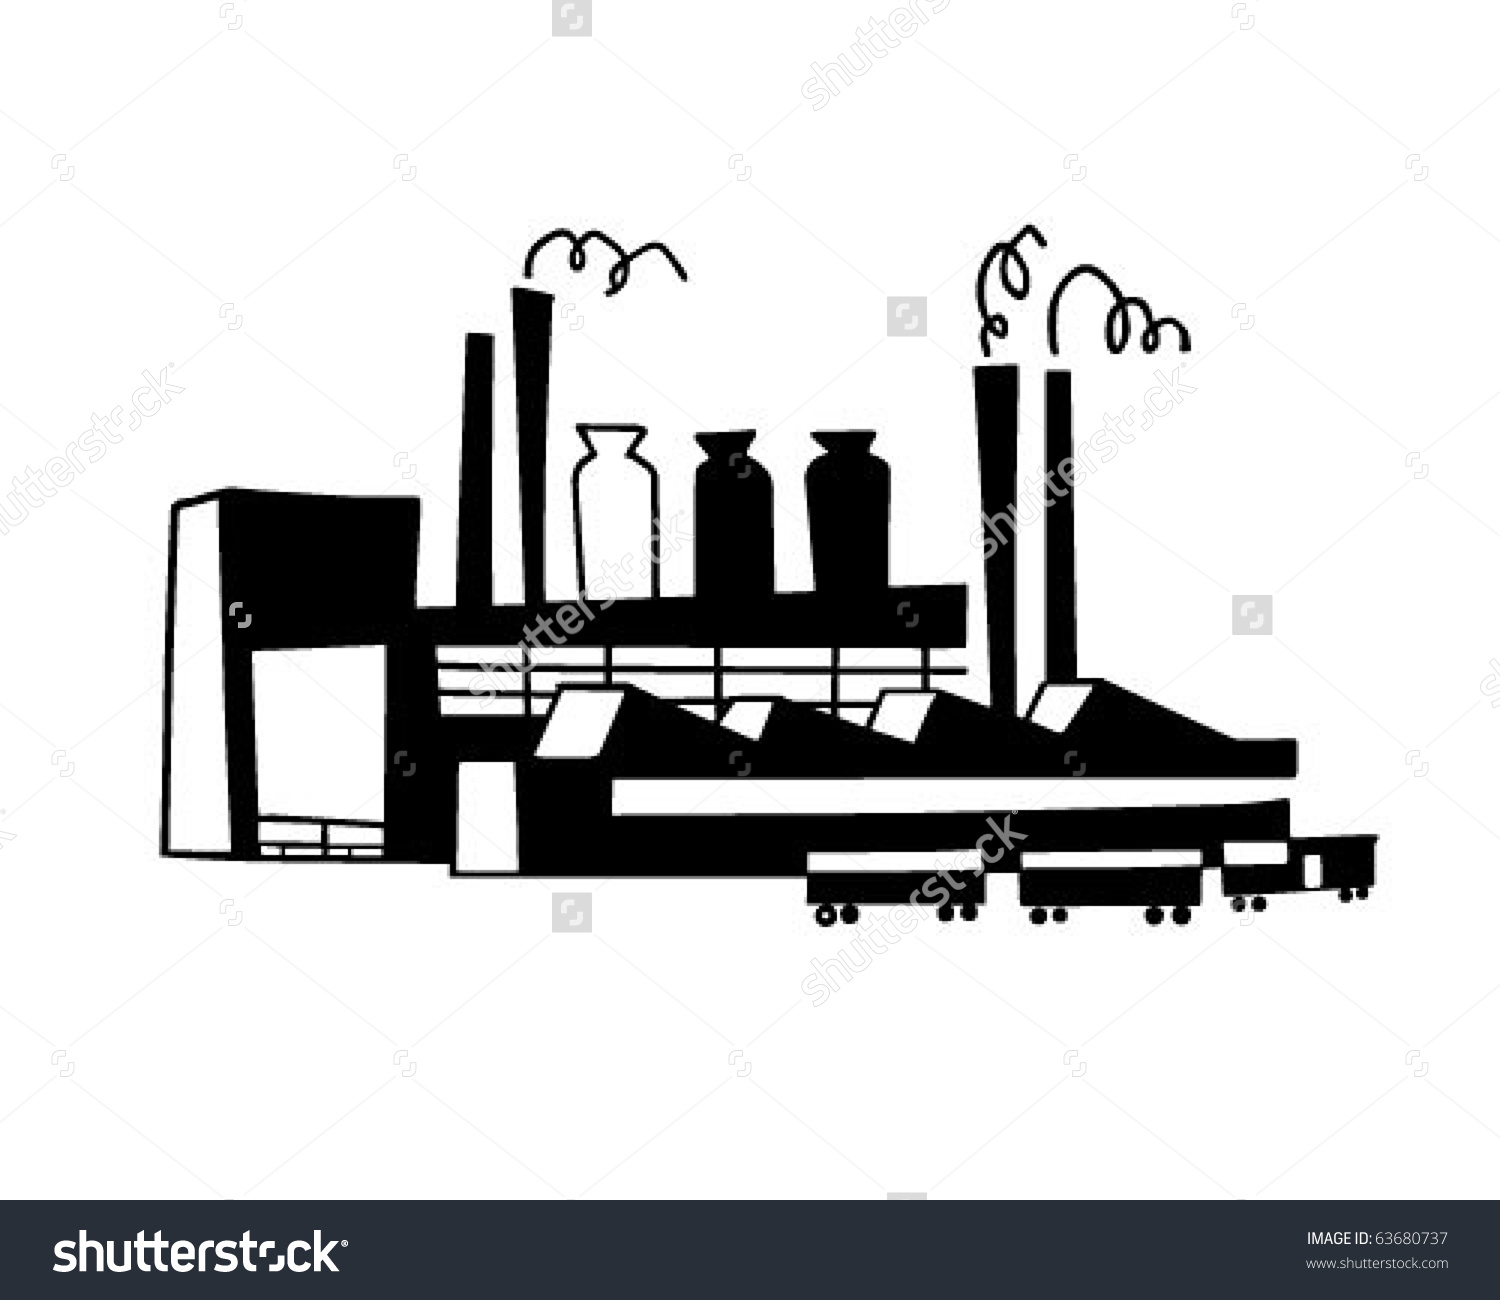 clipart of industry - photo #18